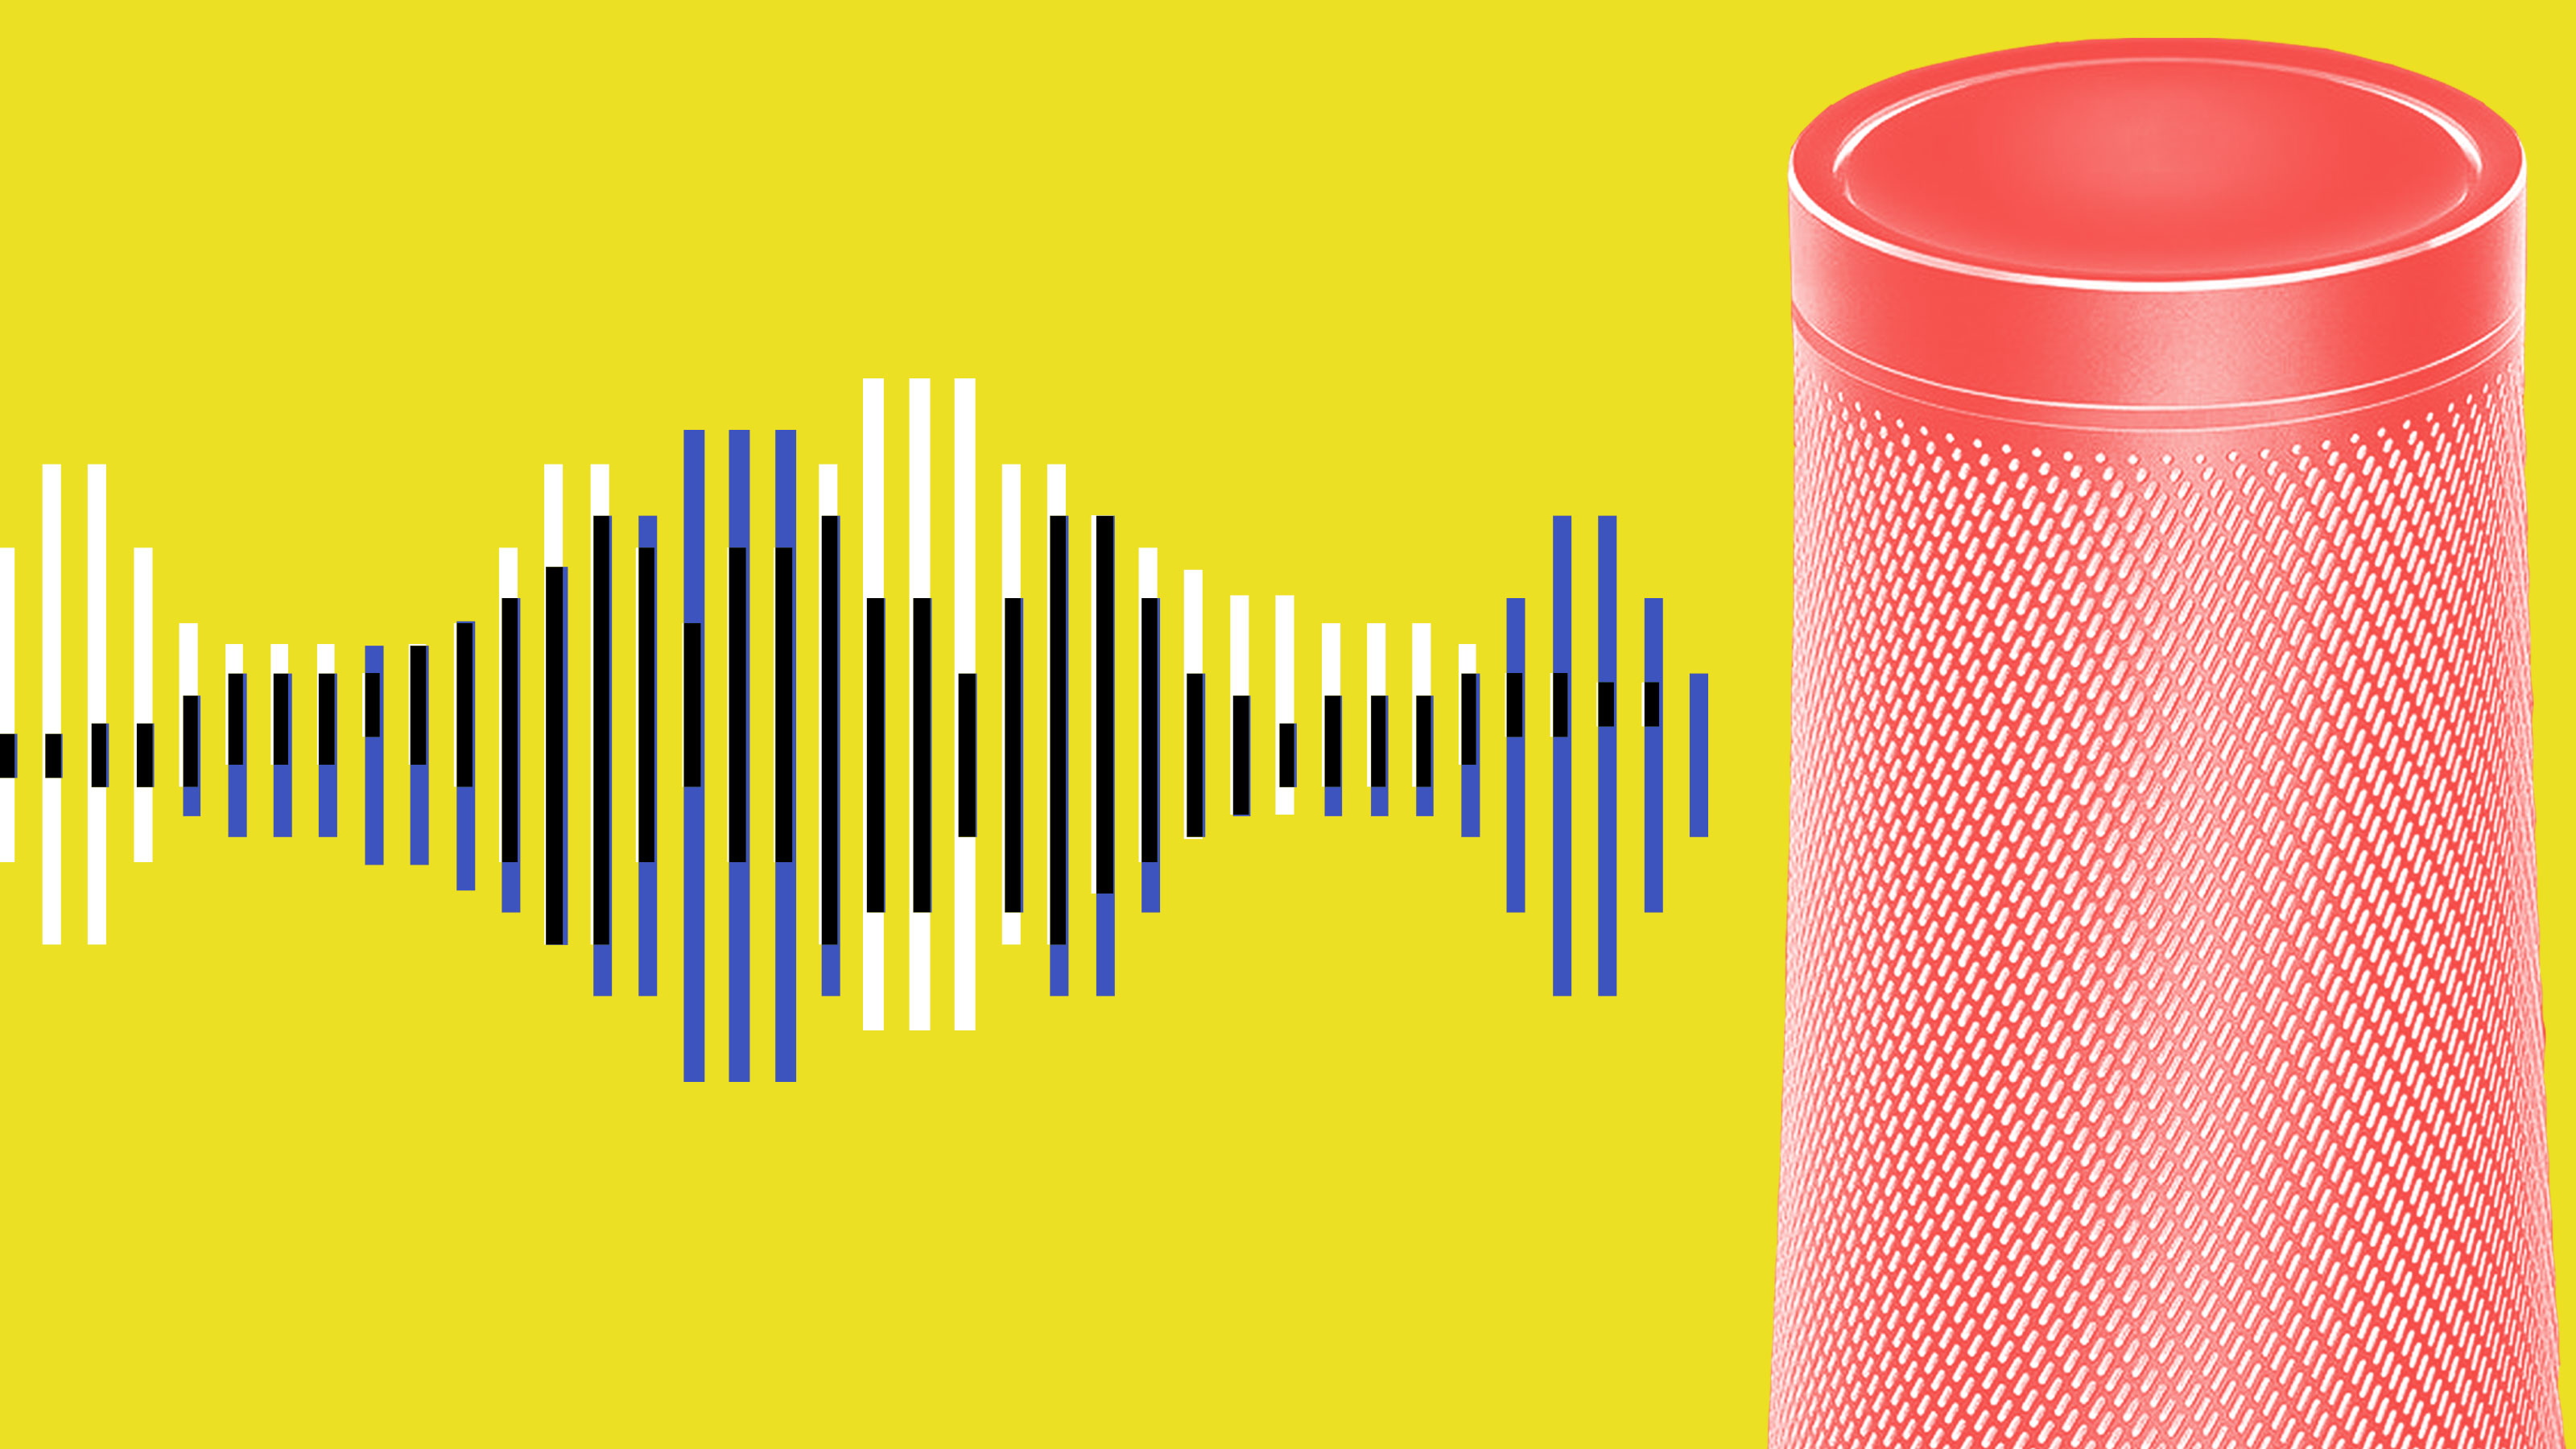 An image of a voice assistant device next to sound waves